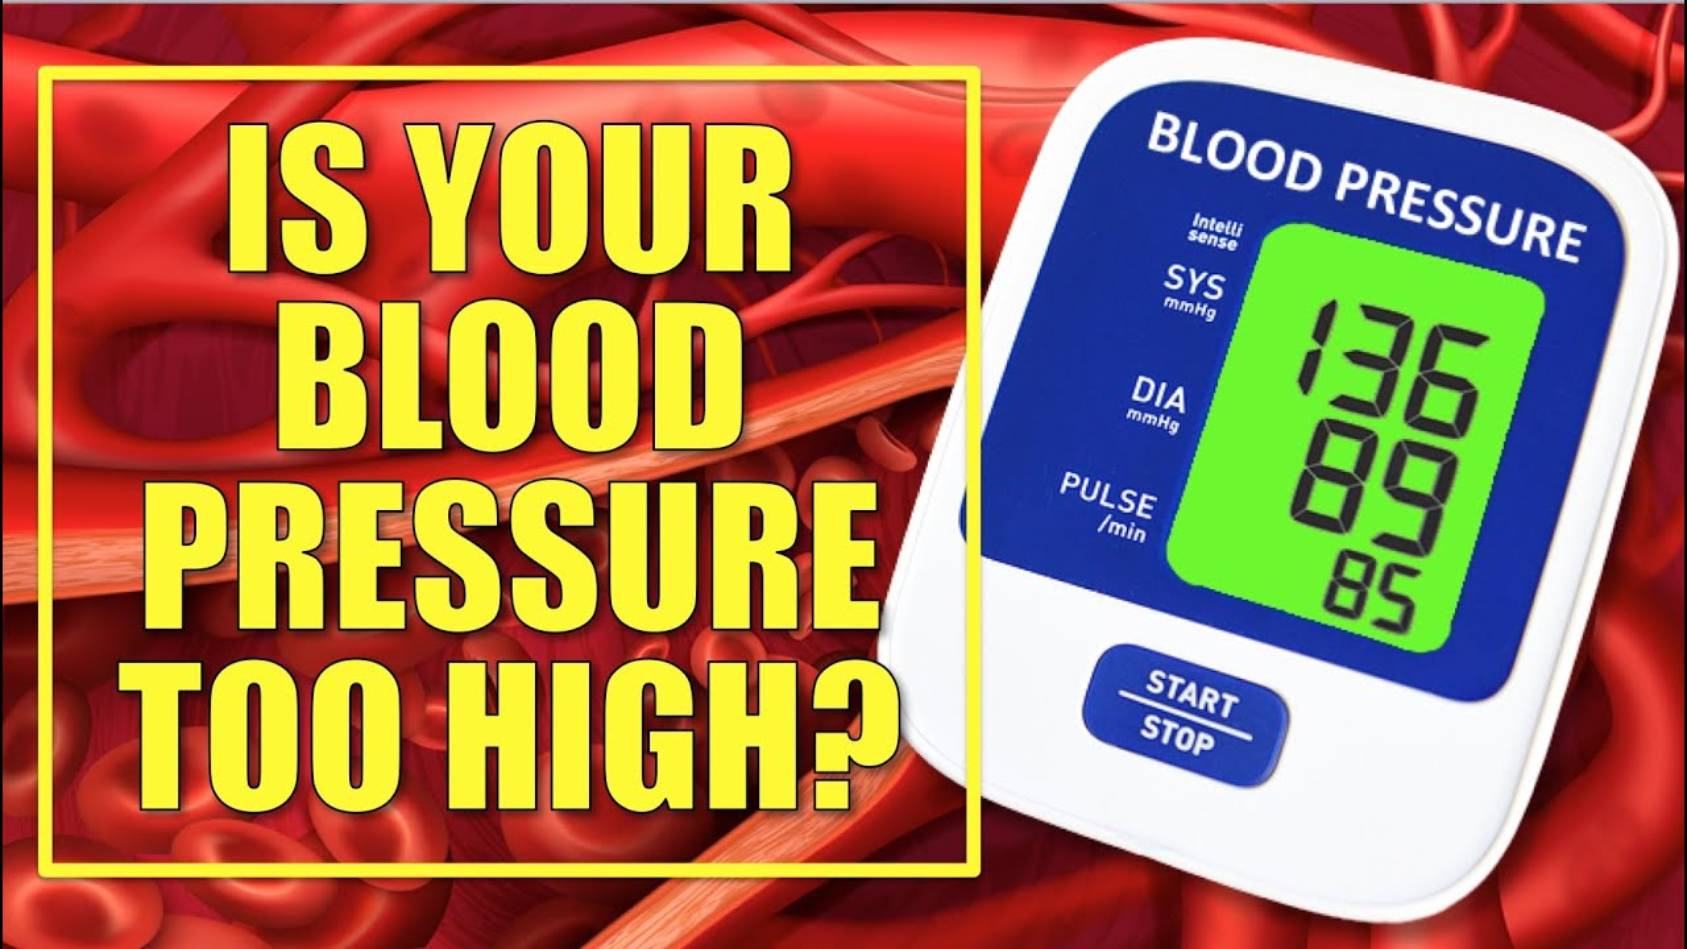 When Is Your Blood Pressure Too High? â HEALTHY BLOOD PRESSURE